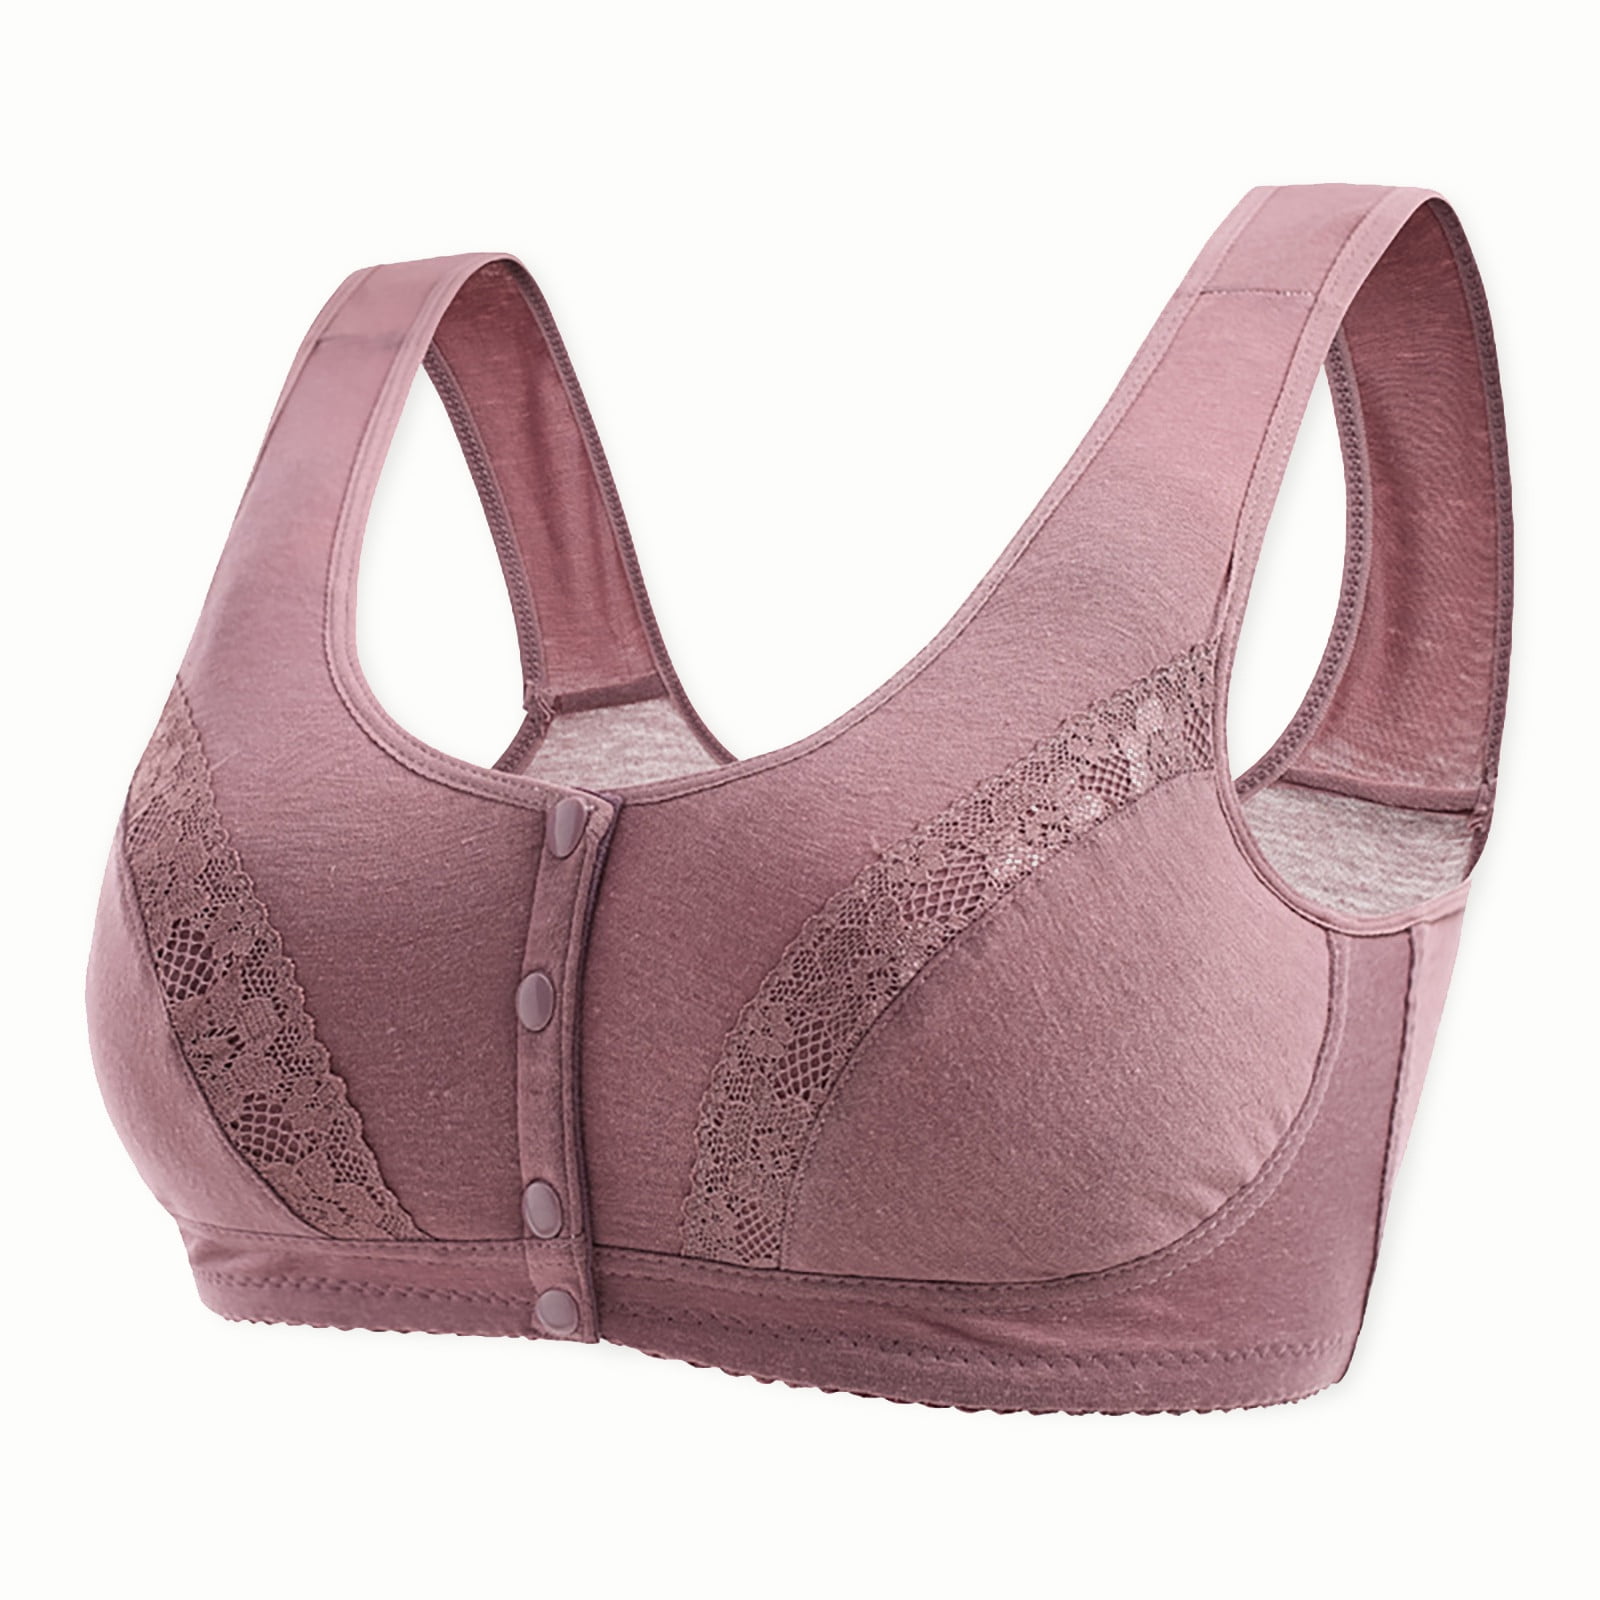 11 Best Comfort and Supportive Front Closure Bras in 2023 Version